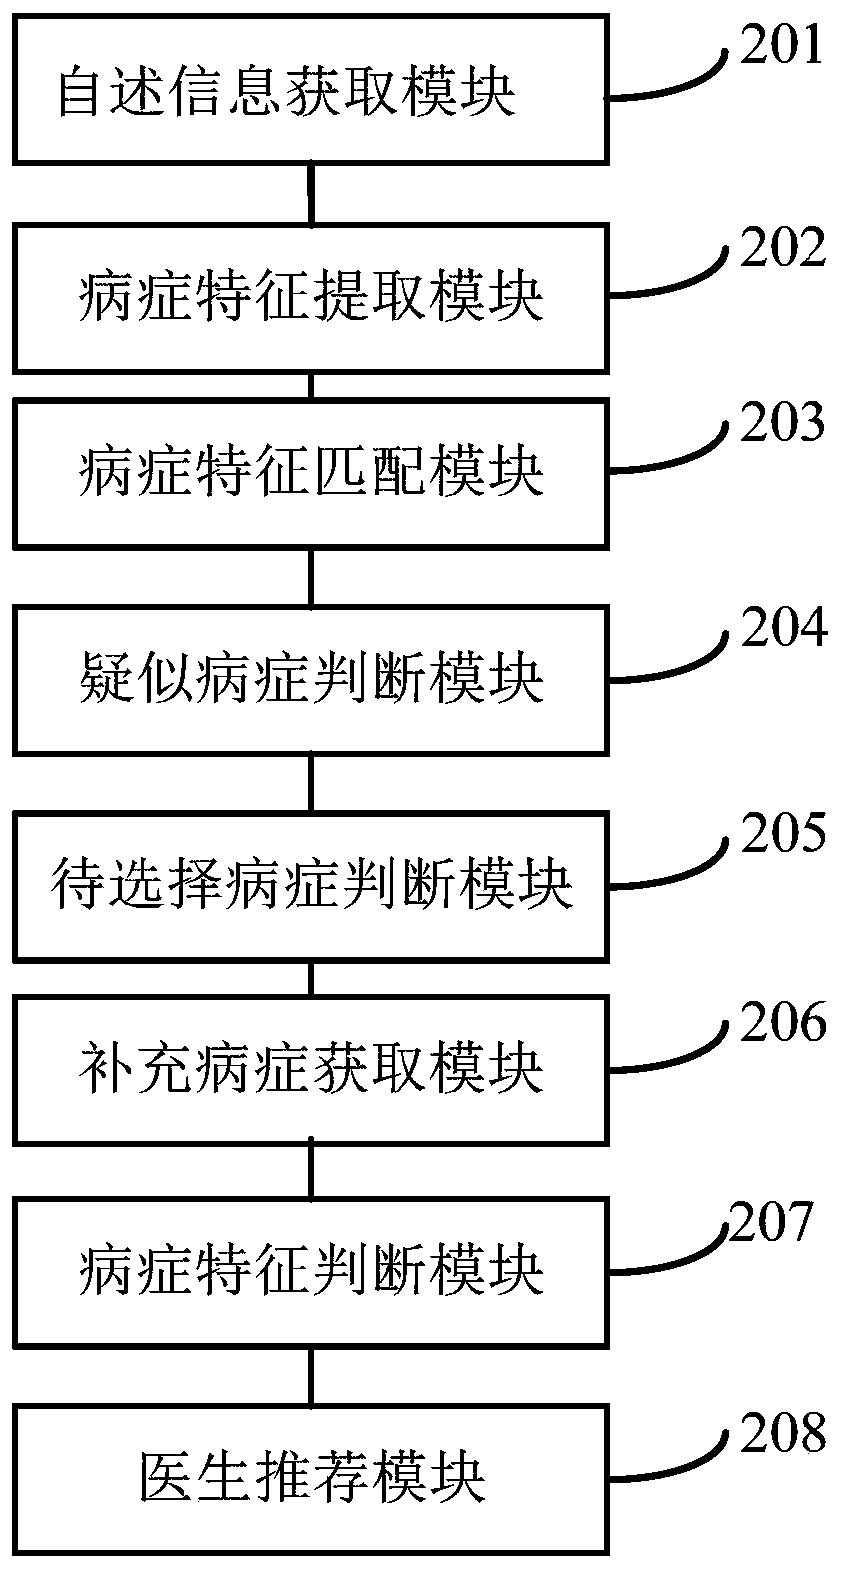 Method and device for recommending doctors according to patient condition information